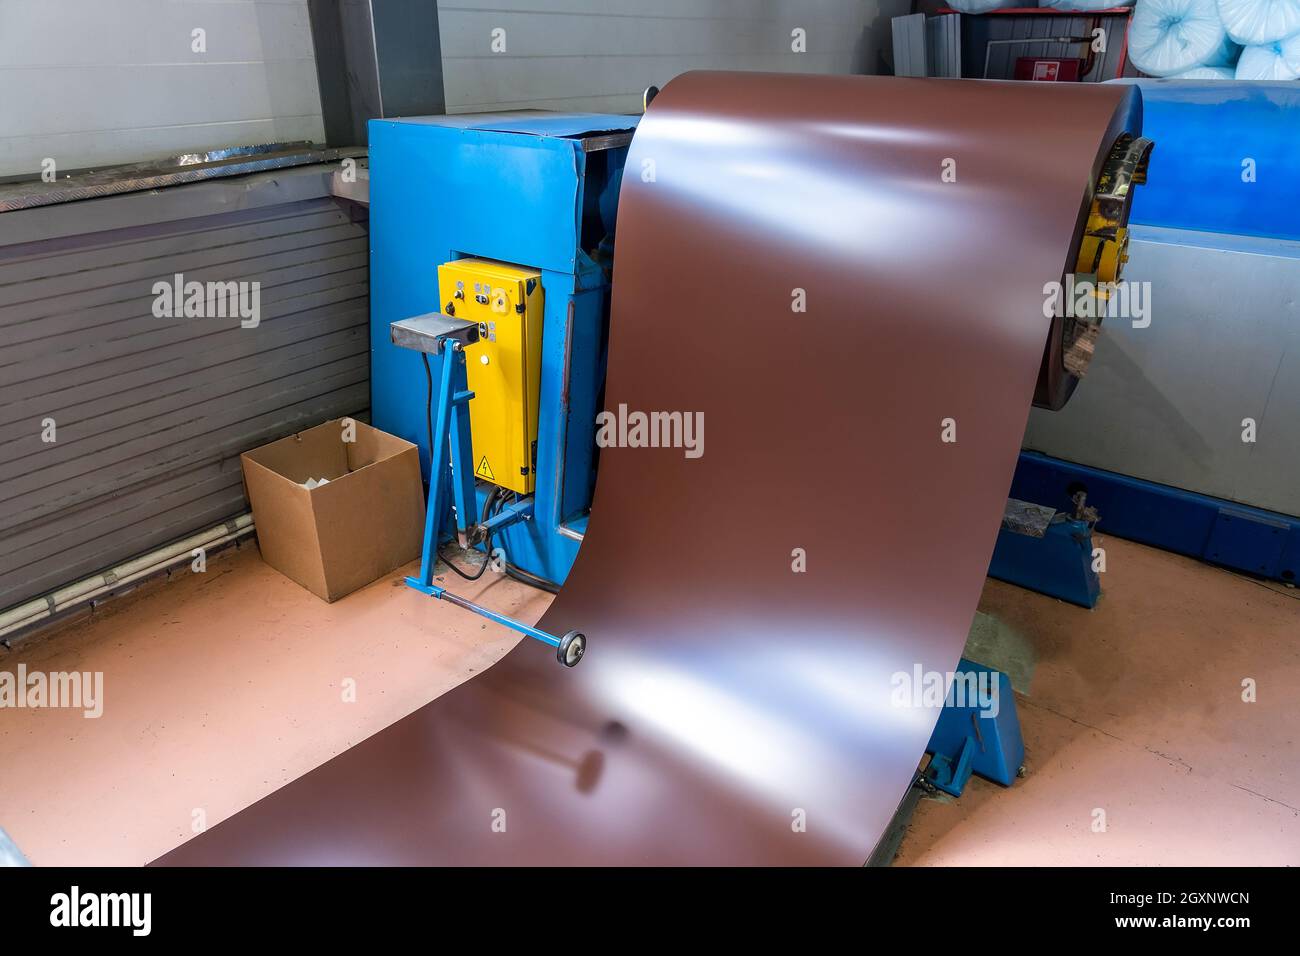 https://c8.alamy.com/comp/2GXNWCN/roll-of-painted-galvanized-steel-sheet-at-cutting-machine-ironworks-and-metalwork-in-factory-2GXNWCN.jpg